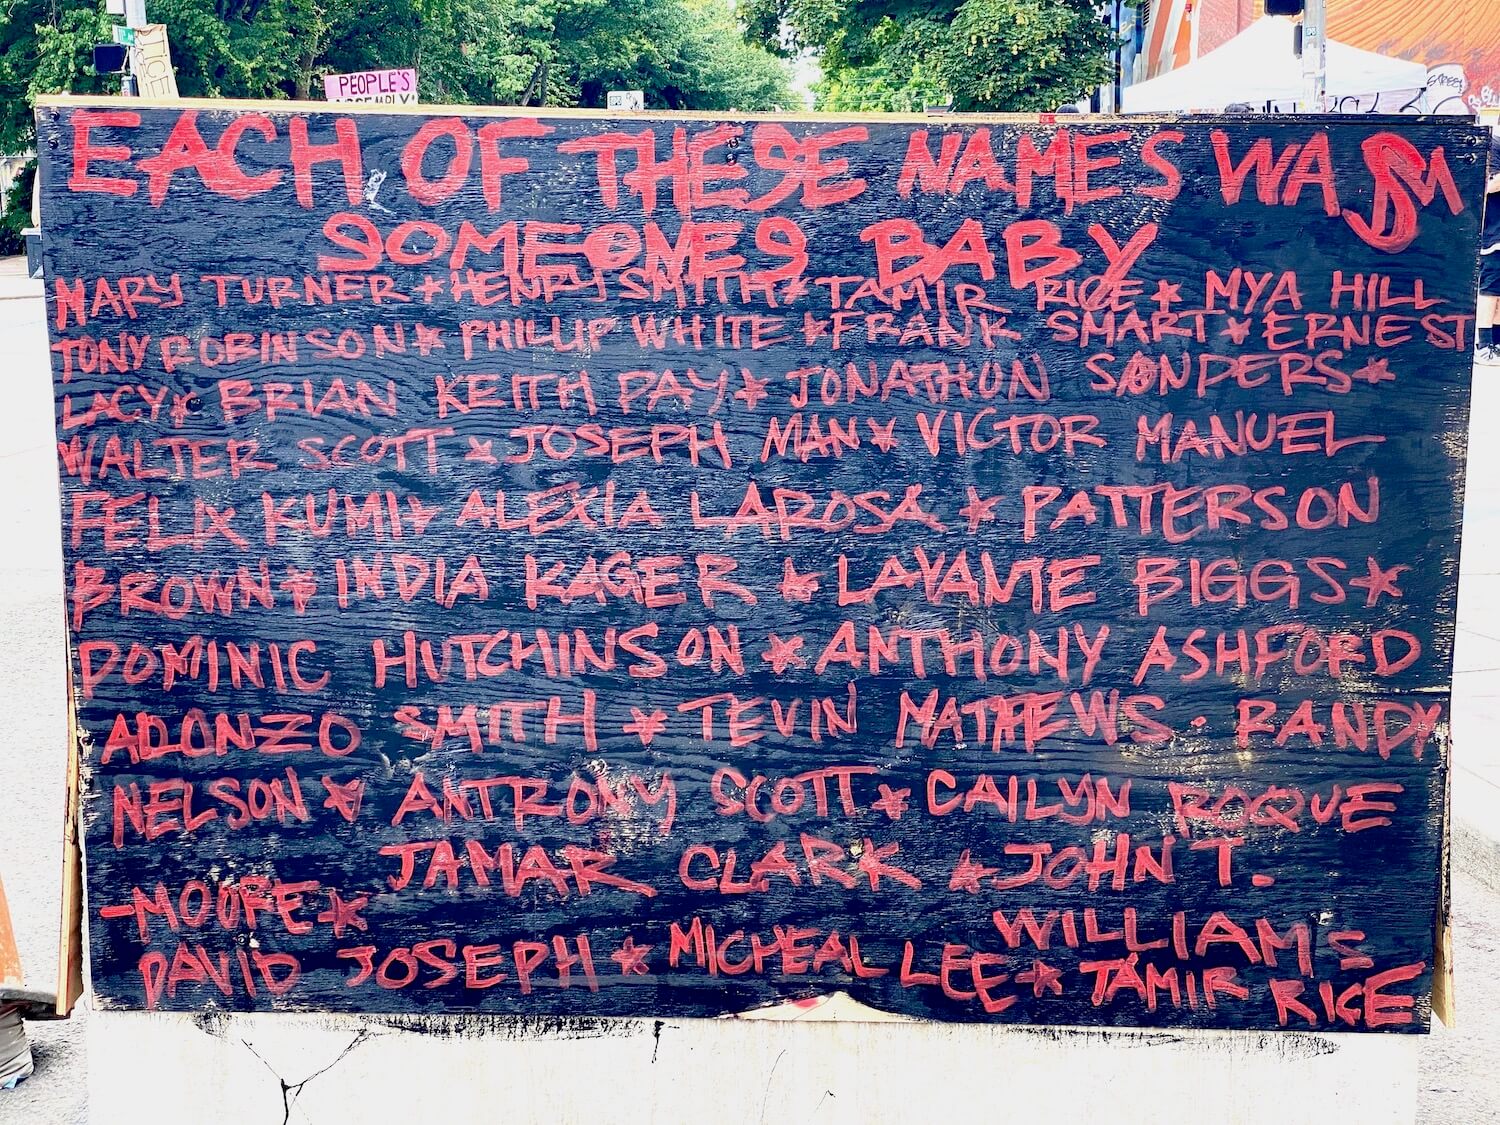 A sign on one of the painted traffic barricades in the Black Lives Matter protest zone in Seattle on Capitol Hill.   This barricade is painted black with red letters that read, Each of these names was someones baby and over 20 names are listed below. 